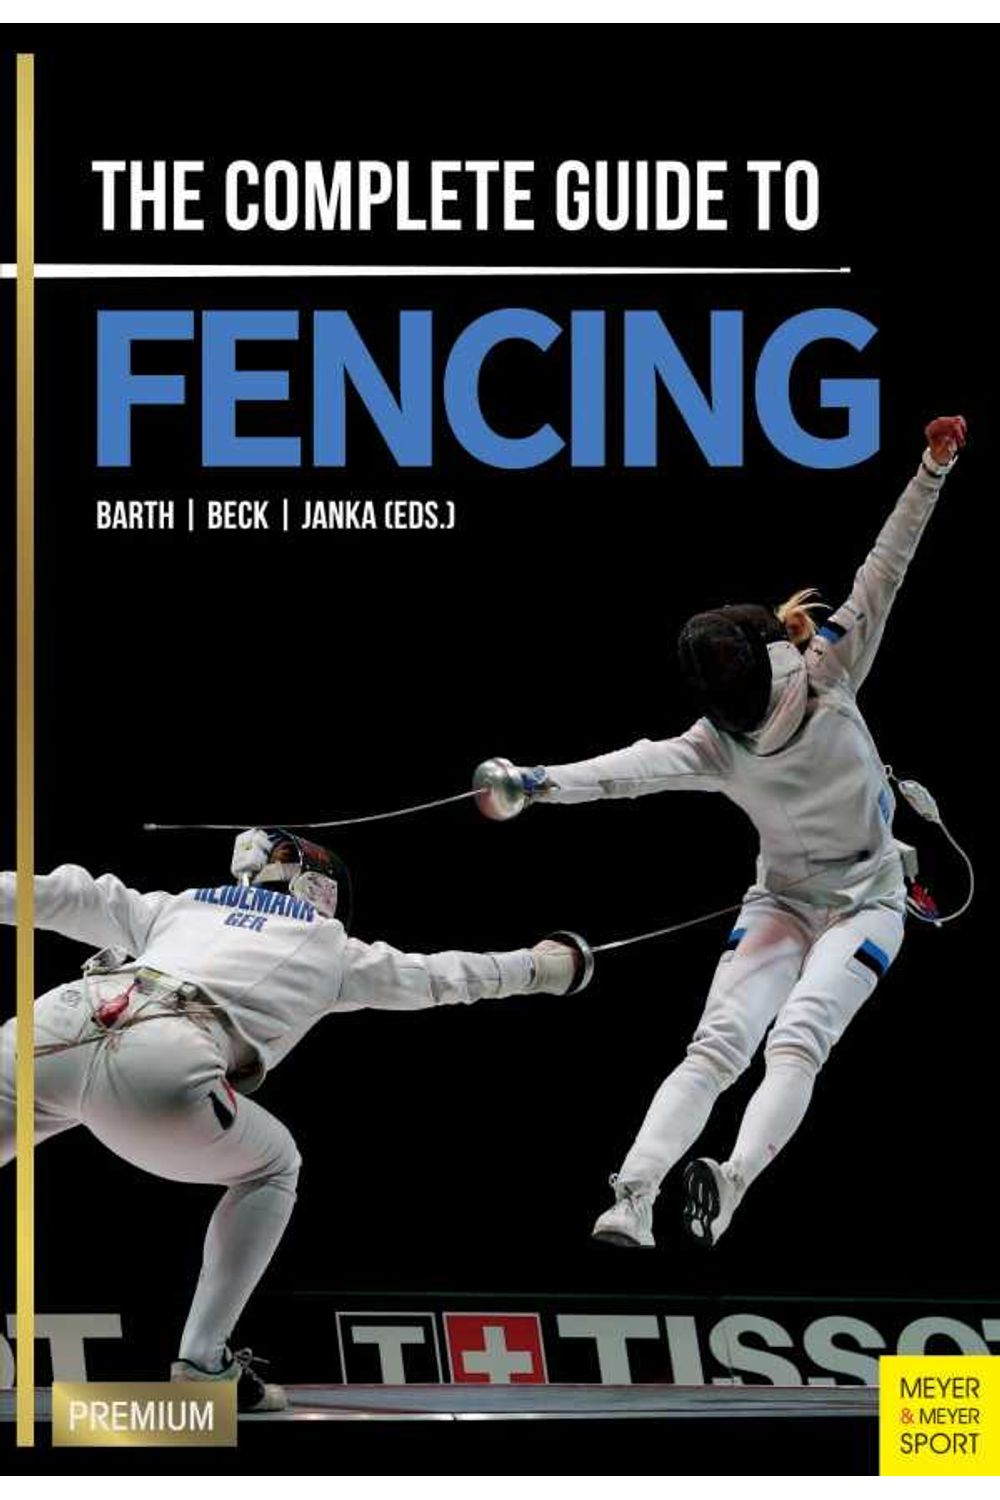 bw-the-complete-guide-to-fencing-meyer-meyer-sport-9781782557760